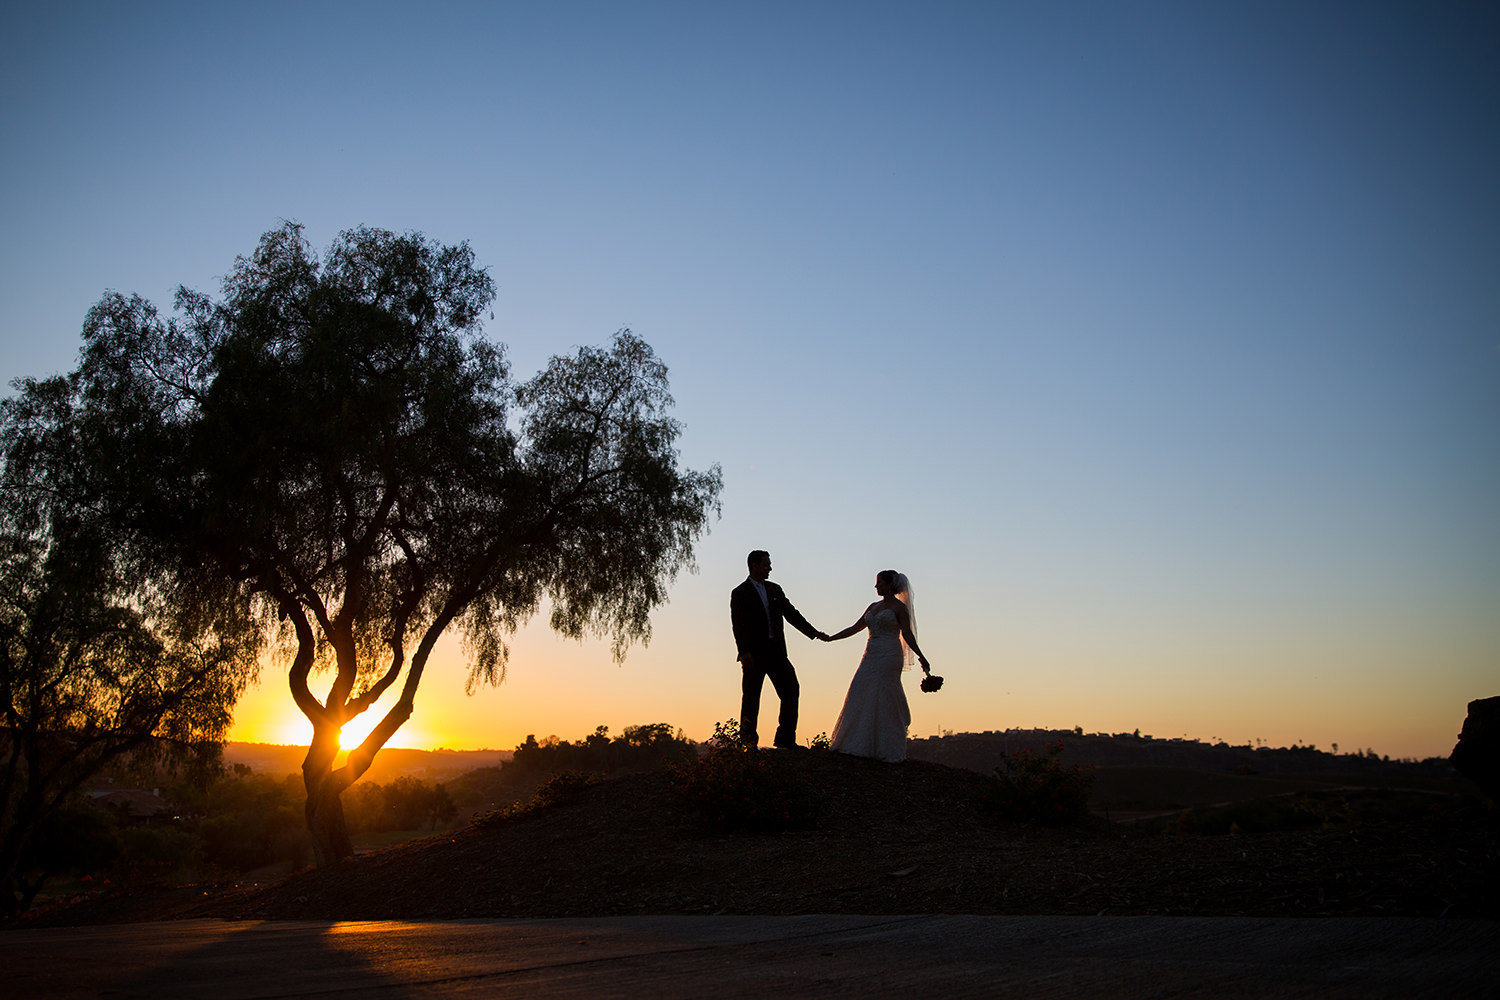 vibert sunset picture at steele canyon with bride and groom